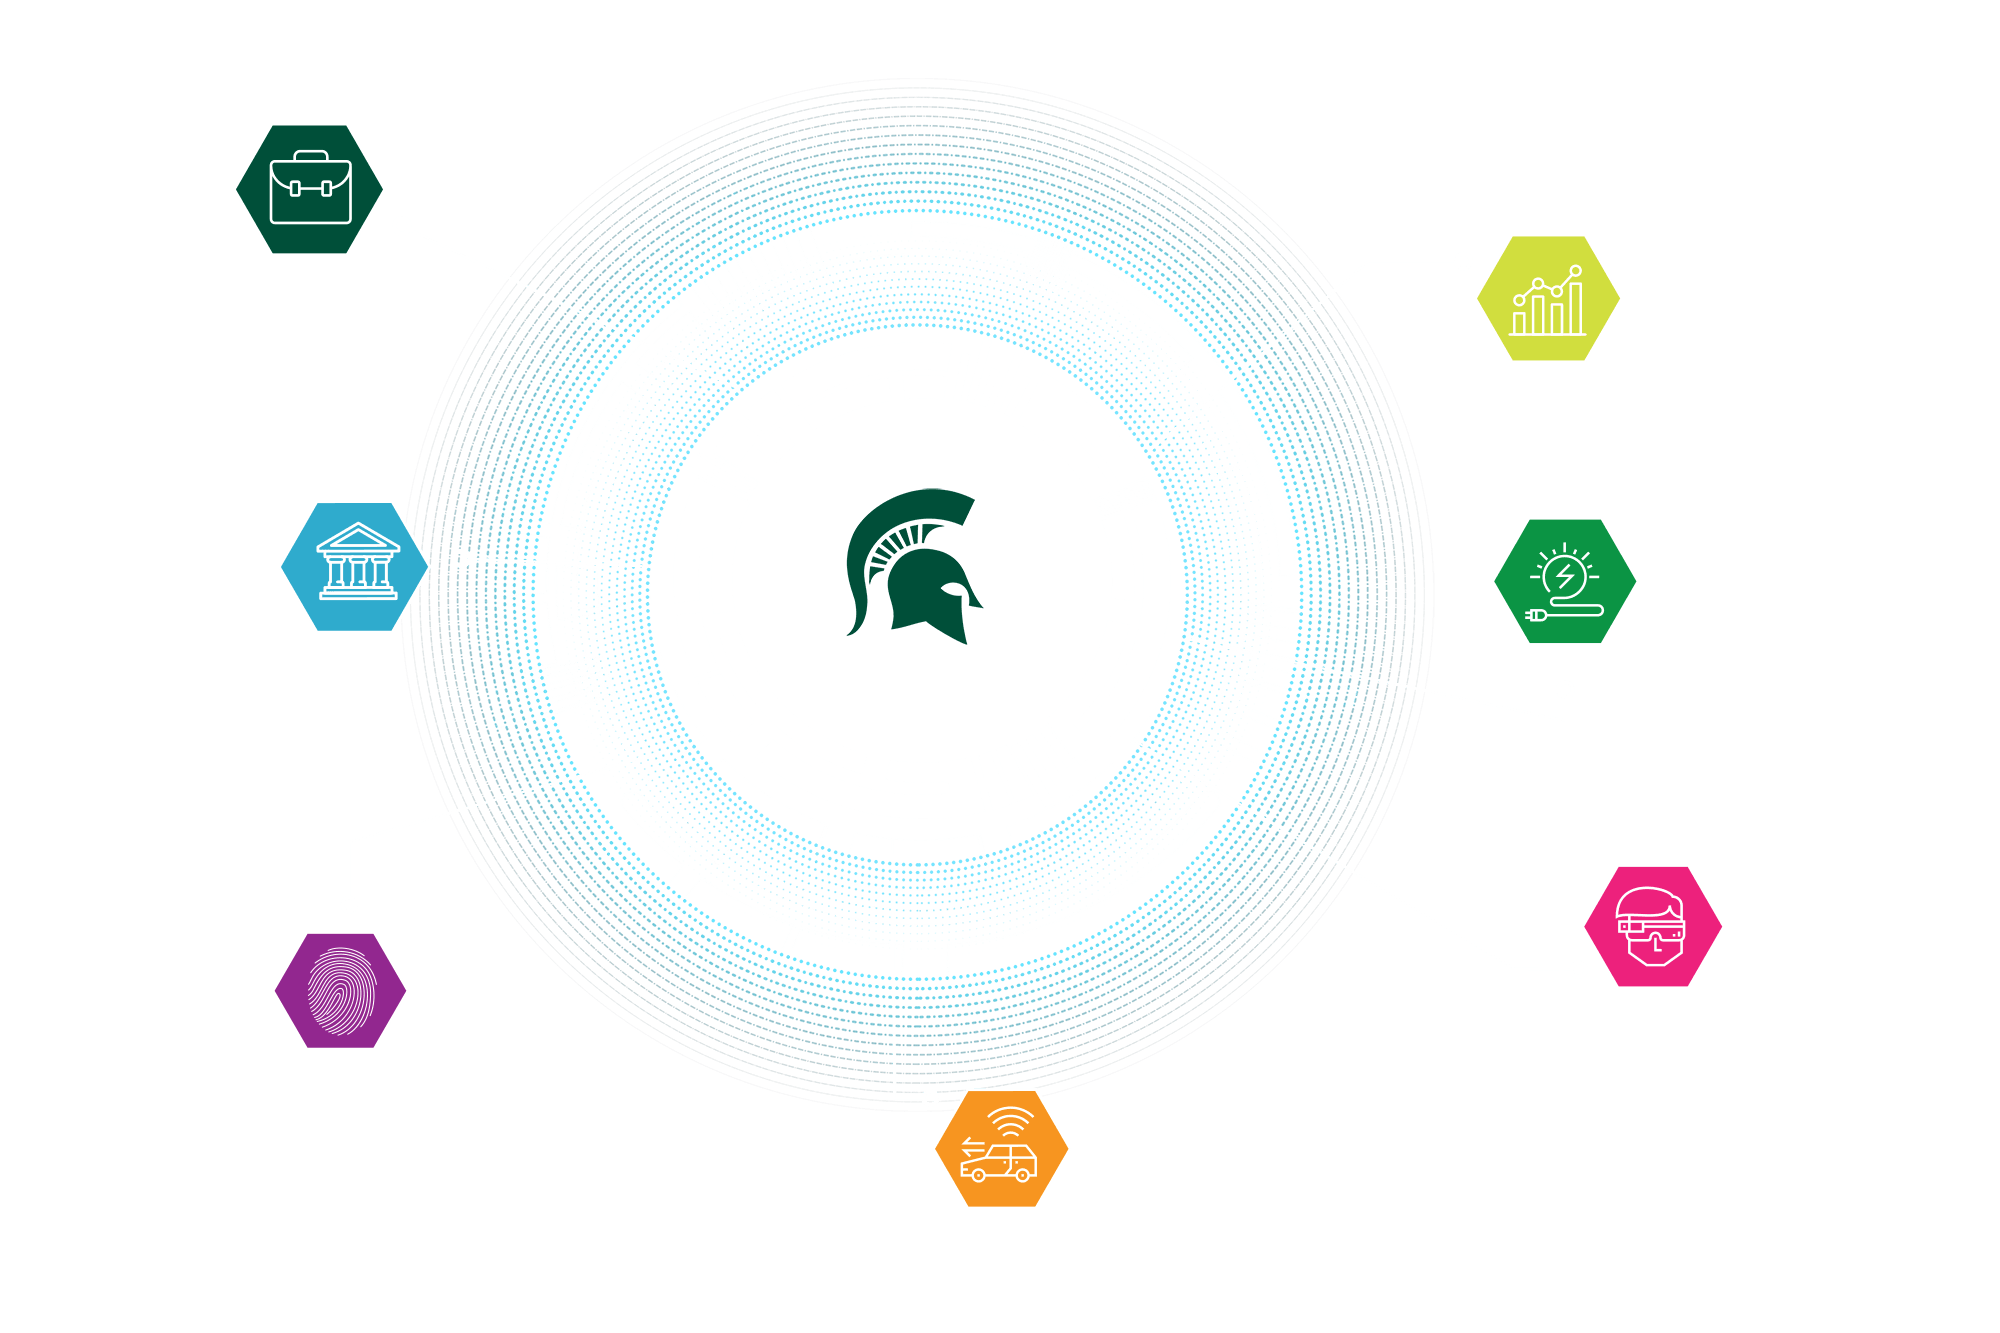 Circular schematic diagram showing MSU's impact with hexagonal icons.